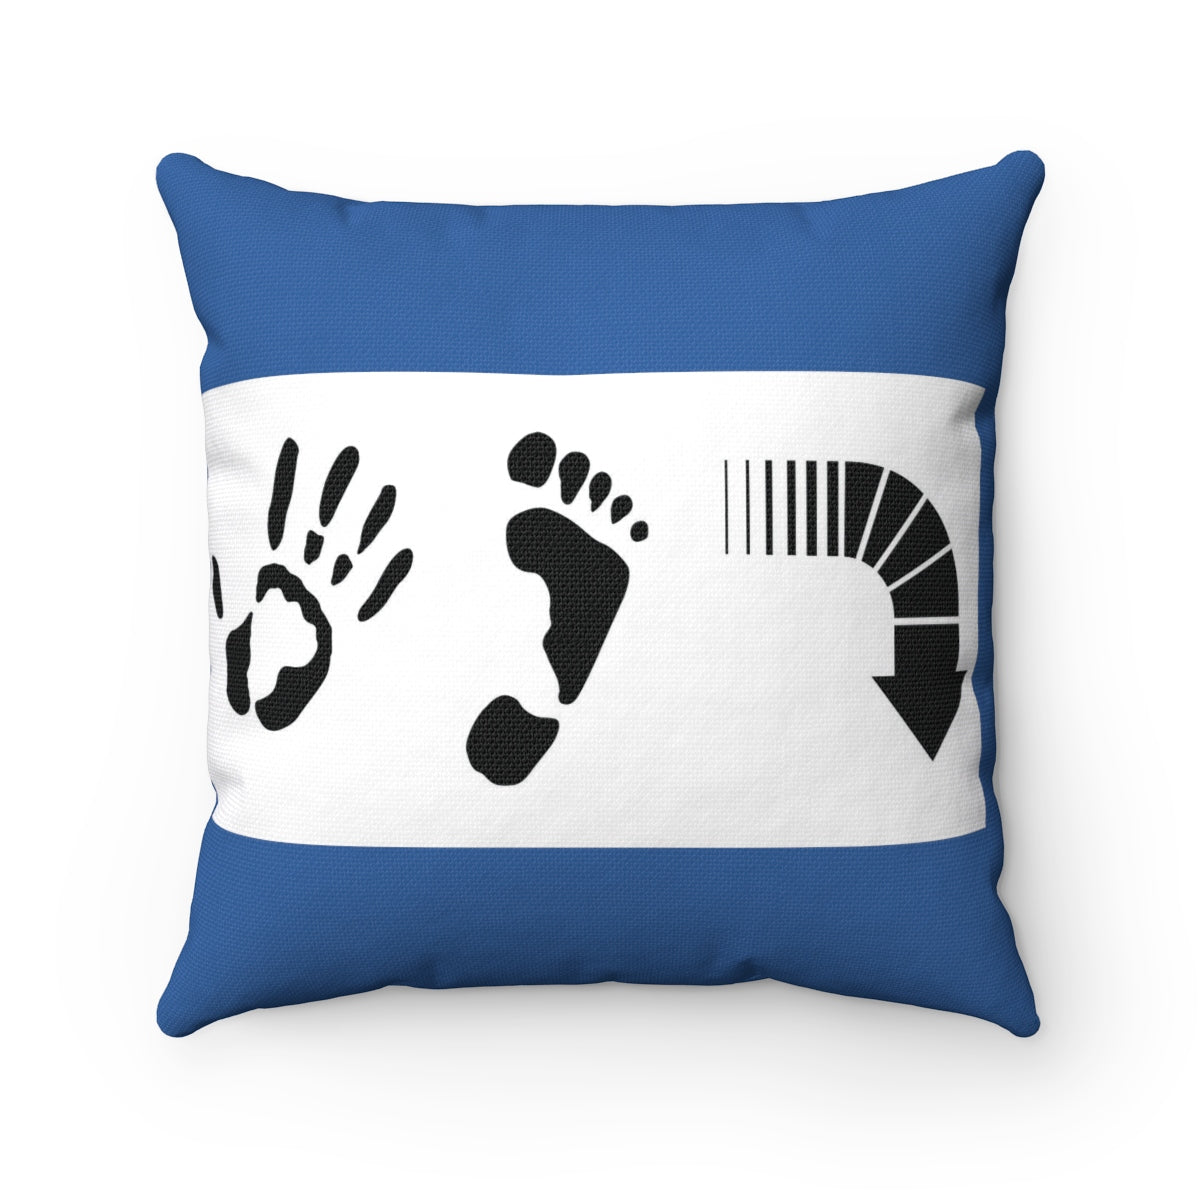 Five Toes Down Flag Spun Polyester Square Pillow